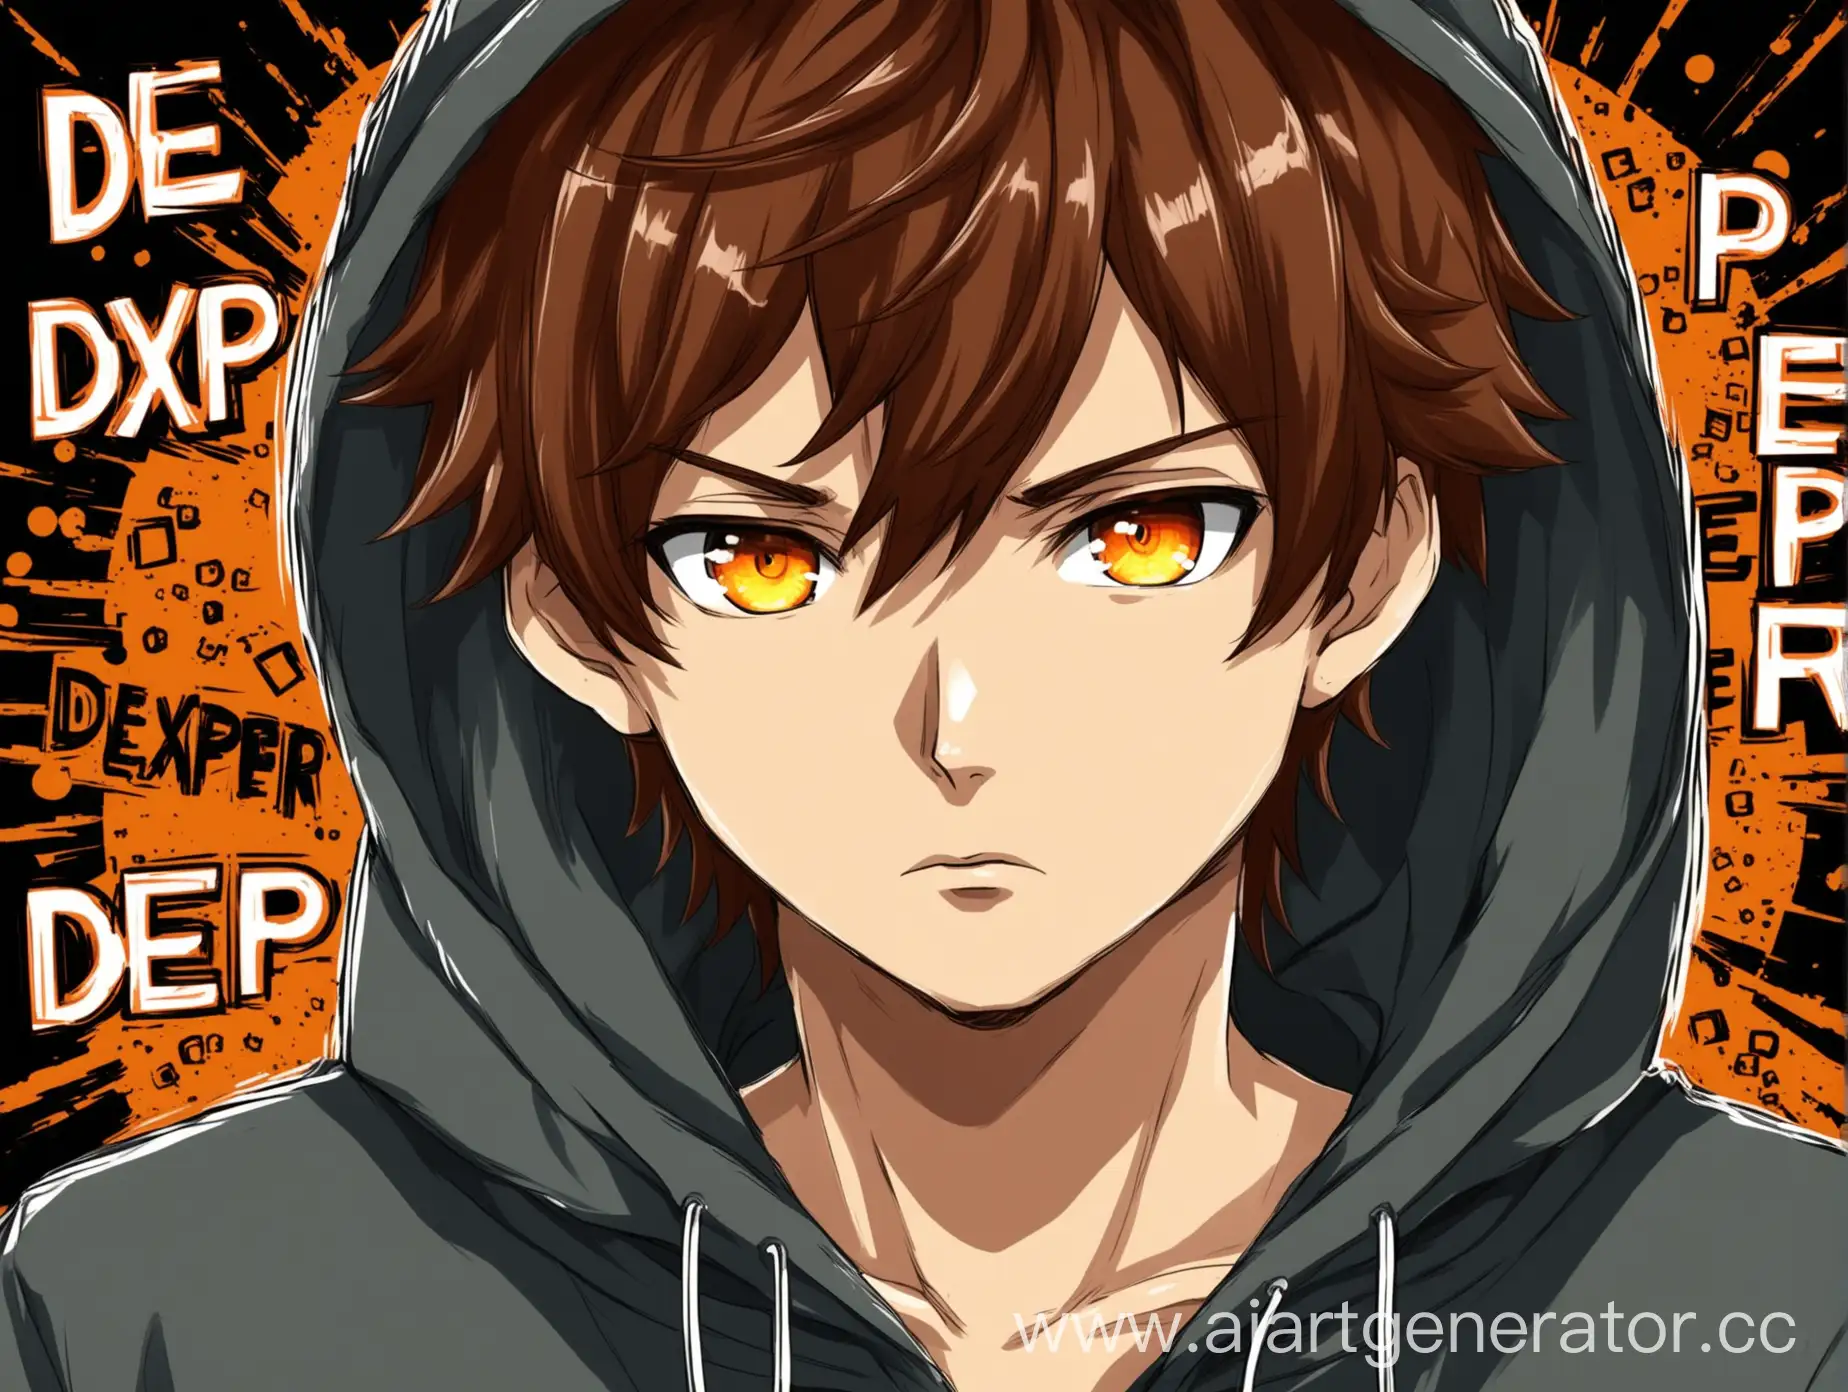 Anime-Boy-with-Amber-Eyes-and-Chestnut-Hair-in-Dexpper-Hoodie